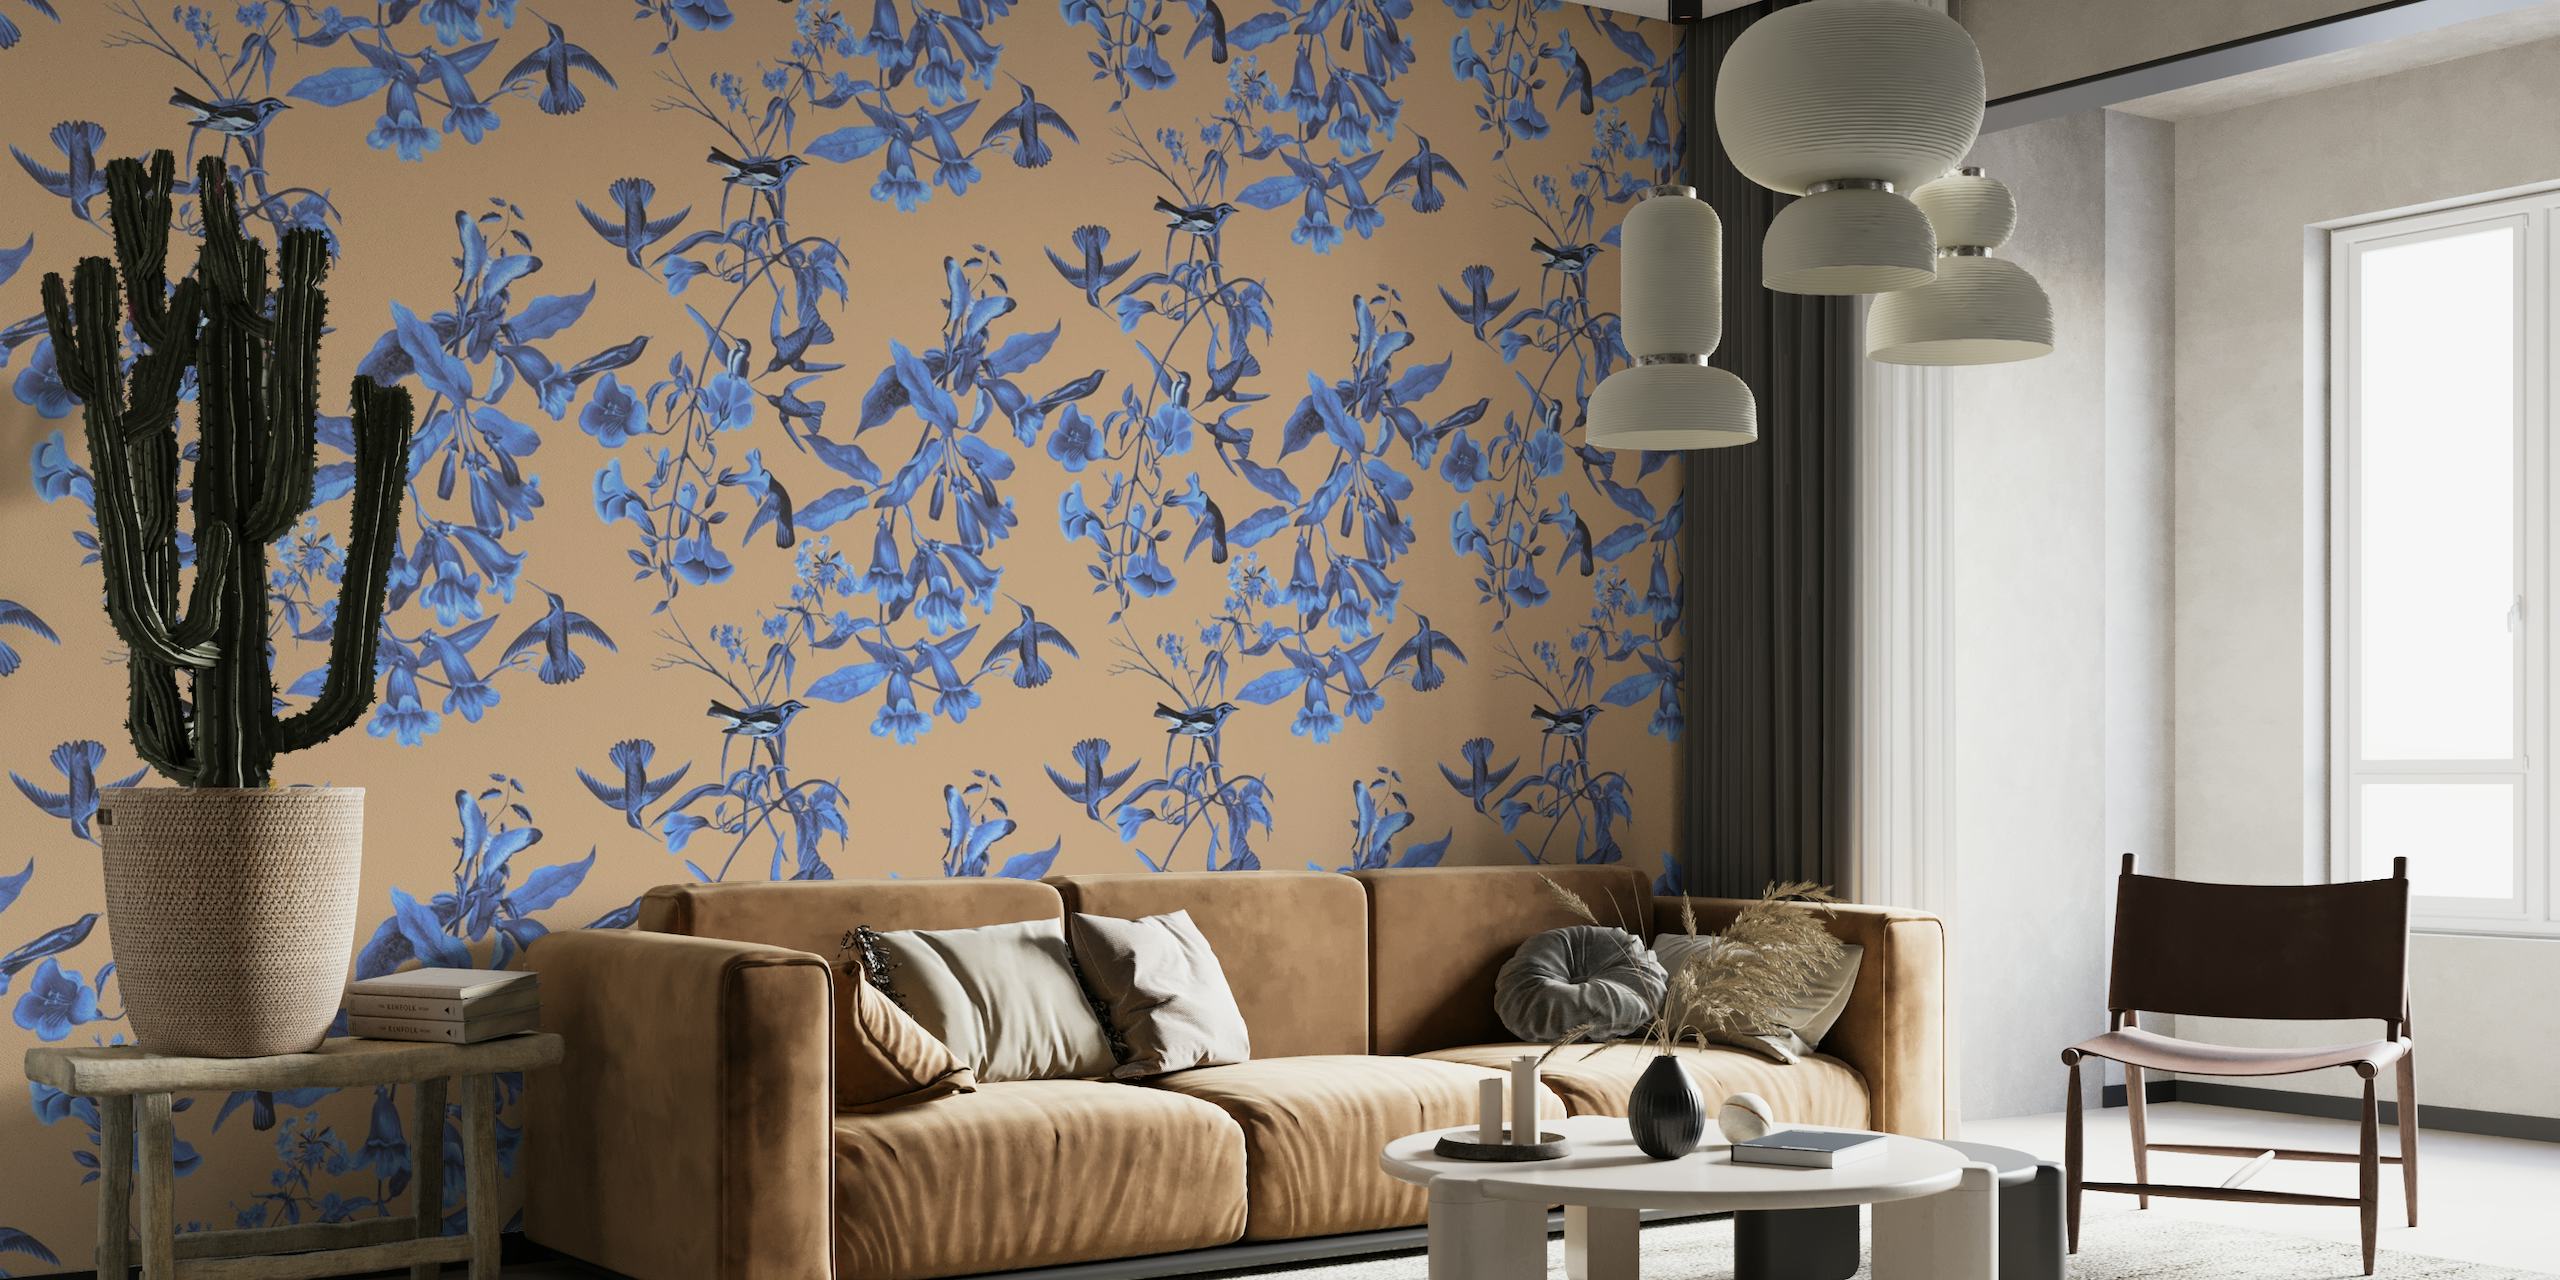 Cyan hummingbirds and blue flowers on taupe wall mural